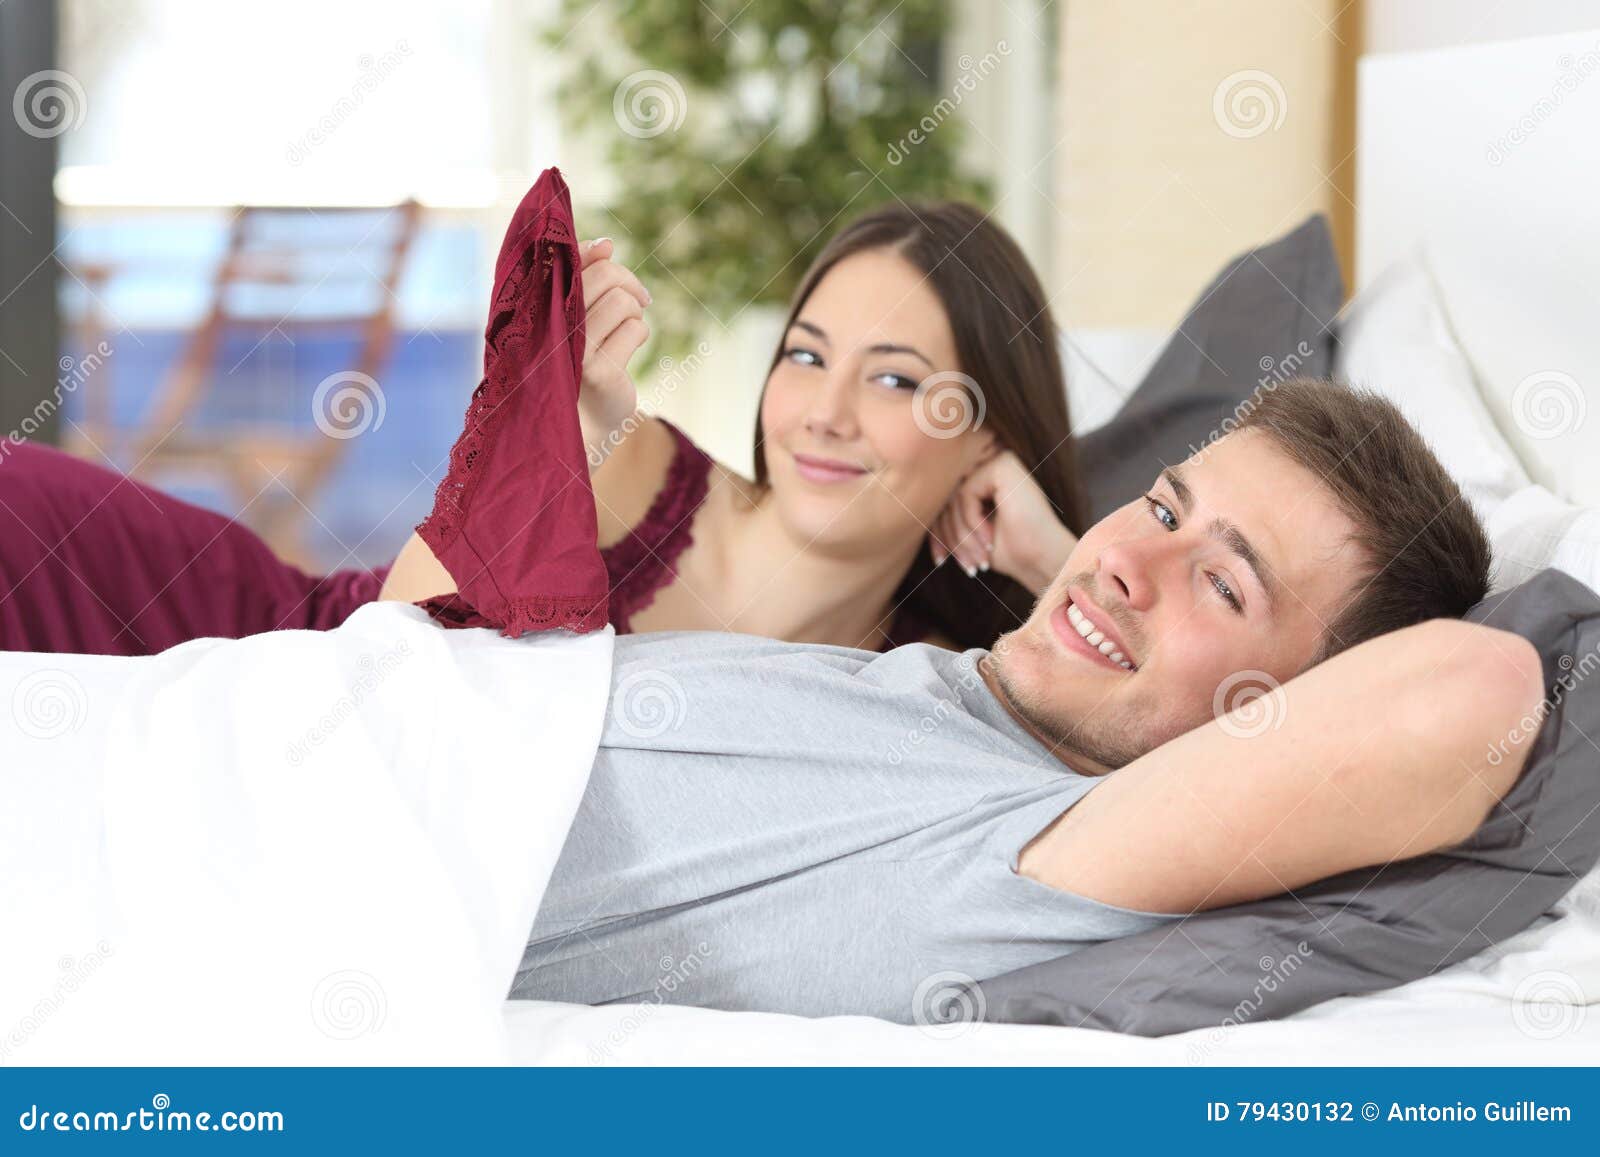 Flirtatious Man on the Bed with a Woman Stock Photo picture